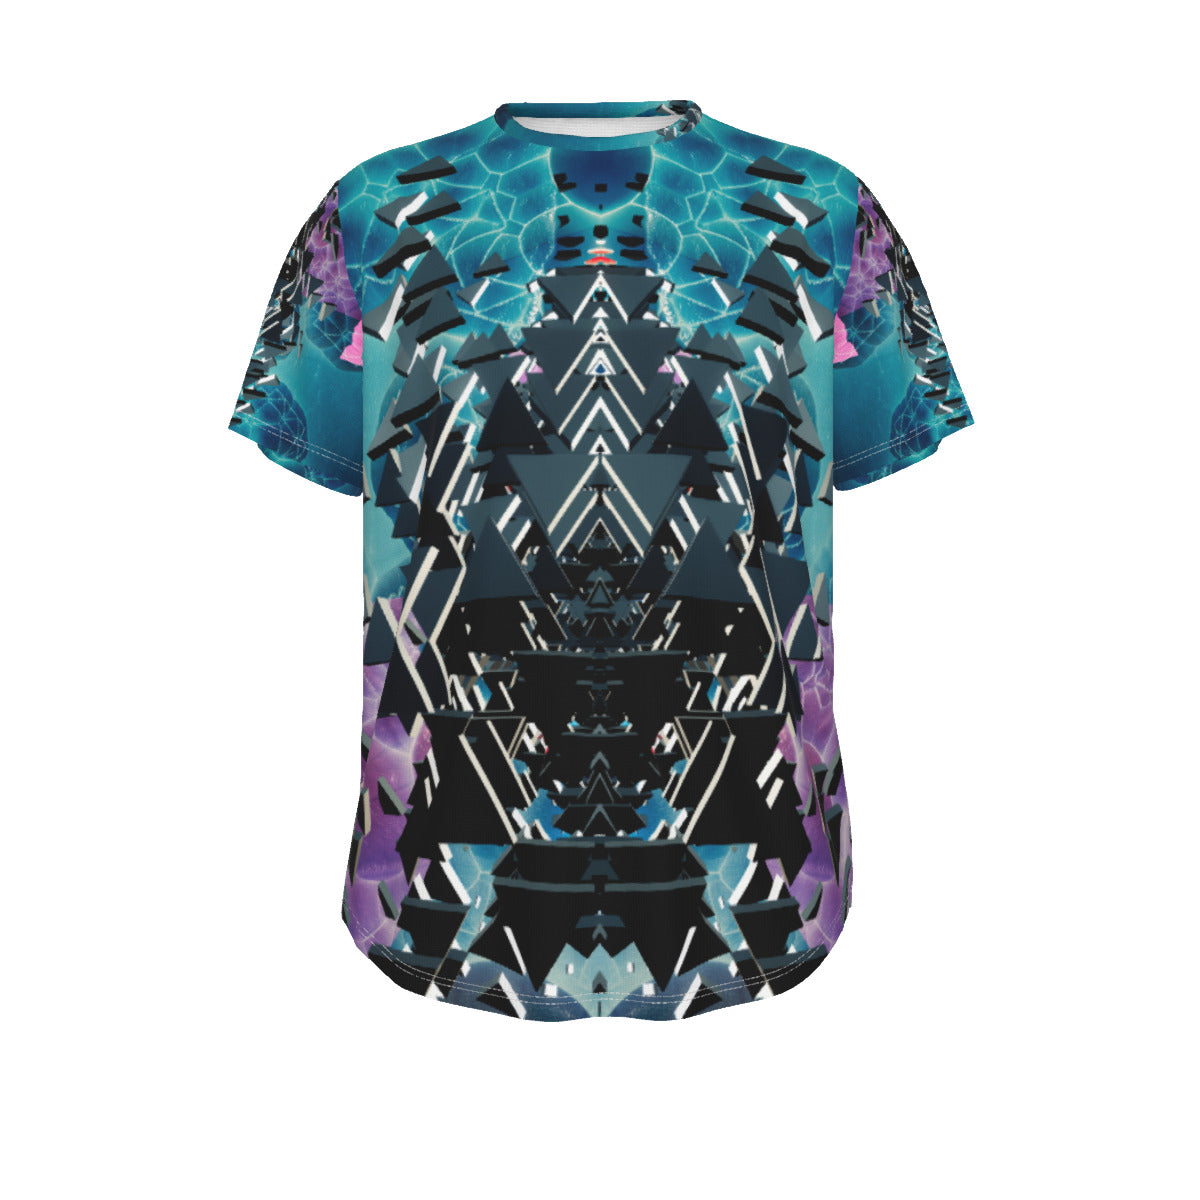 Psychedelic All-Over Print Men's Short Sleeve Rounded Hem T-shirt